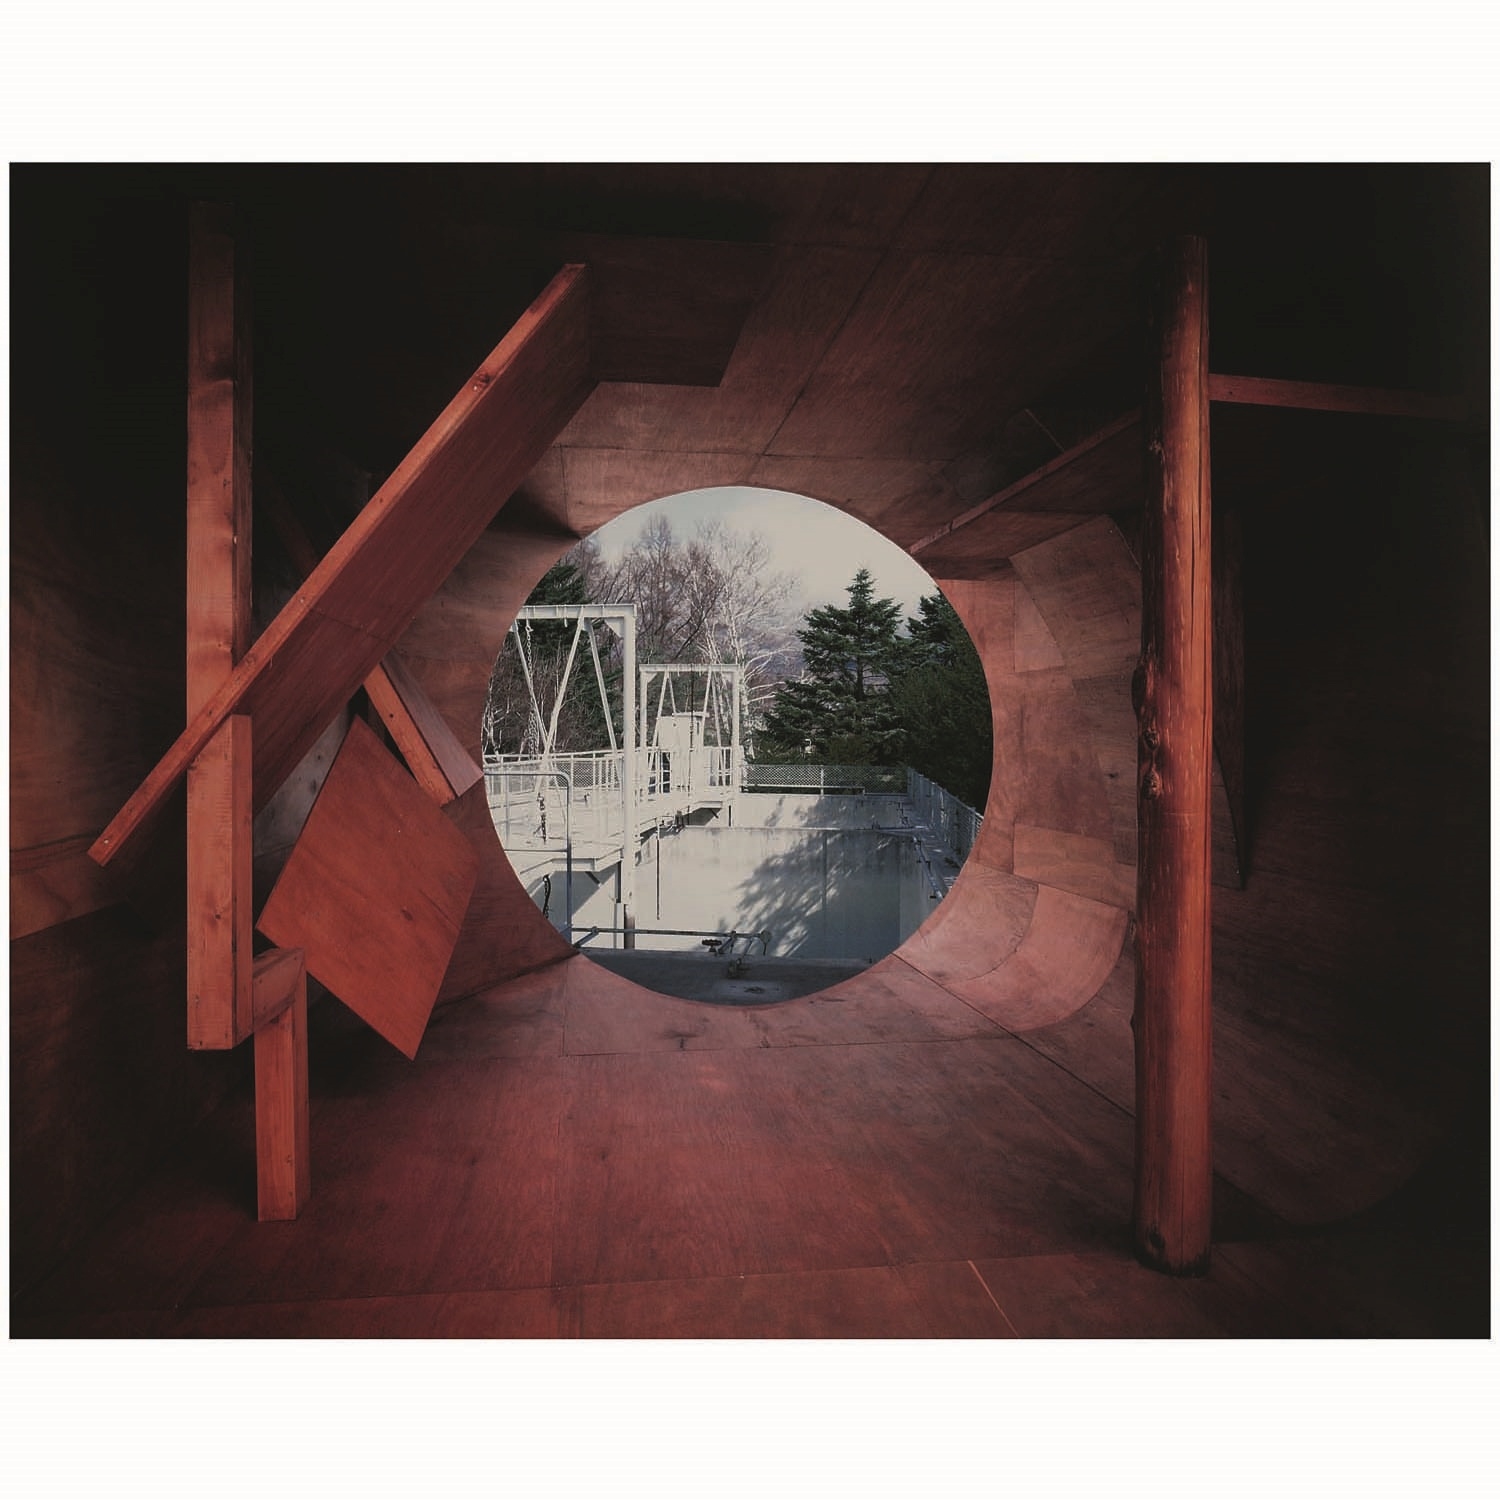 MIYOTA (BOIS) by Georges Rousse, 1999